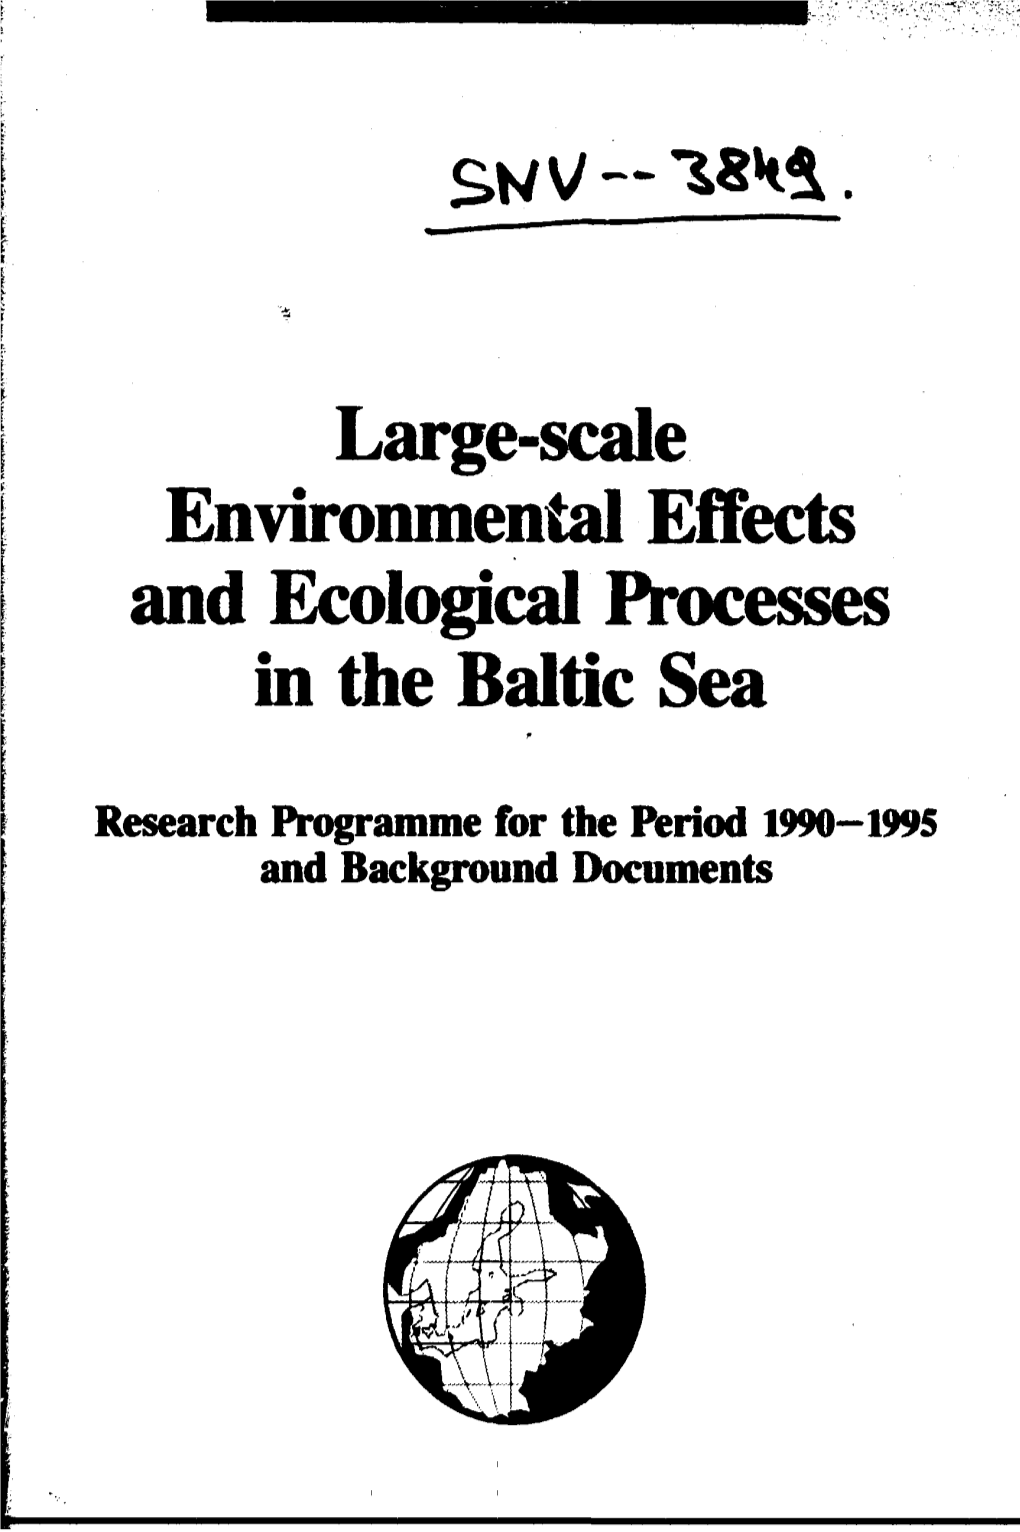 Large-Scale Environmental Effects and Ecological Processes in the Baltic Sea